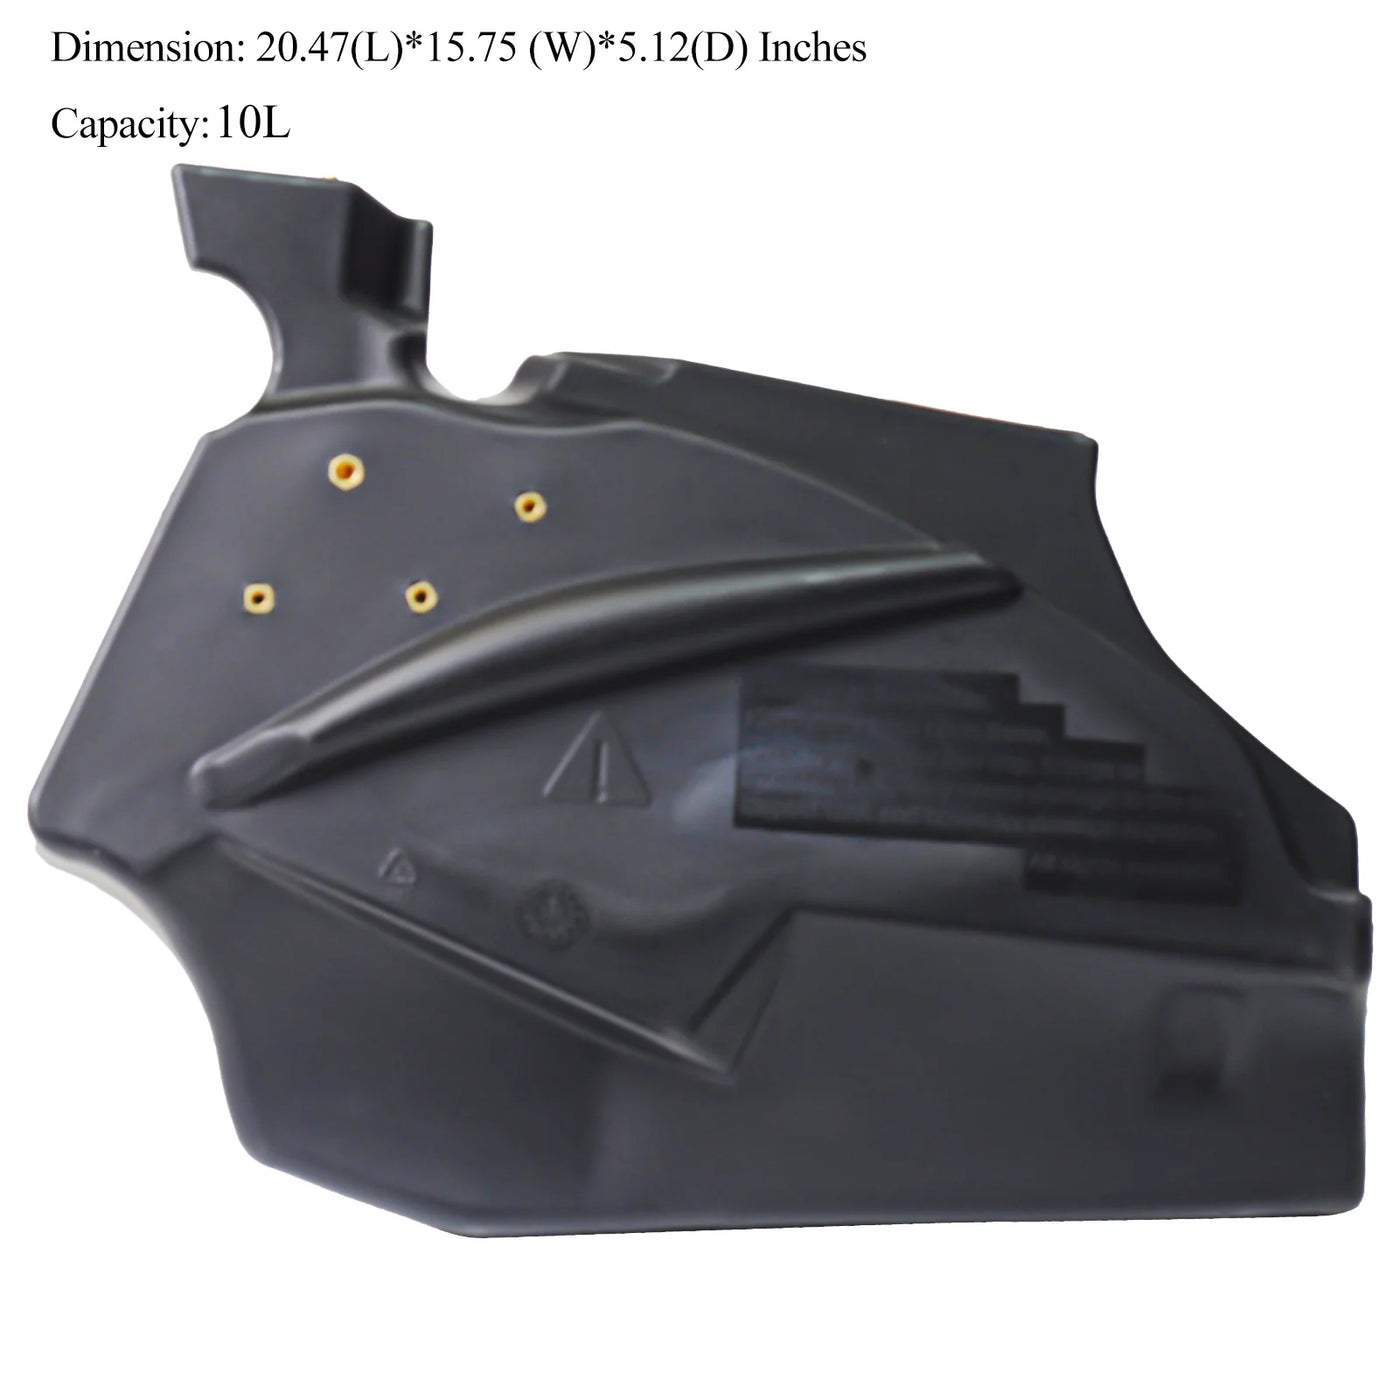 BMW Motorcycle Auxiliary Fuel Tank Made of PE Material for BMWR1200GS BMWR1250GS/Adventure (20.47x15.75x5.12 inches, 10L) Gasoline Container Gas Tank BMW Auxiliary Gas Tank Fits BMW Pannier Rack GIVI Rack Loboo Rack From Year 2013